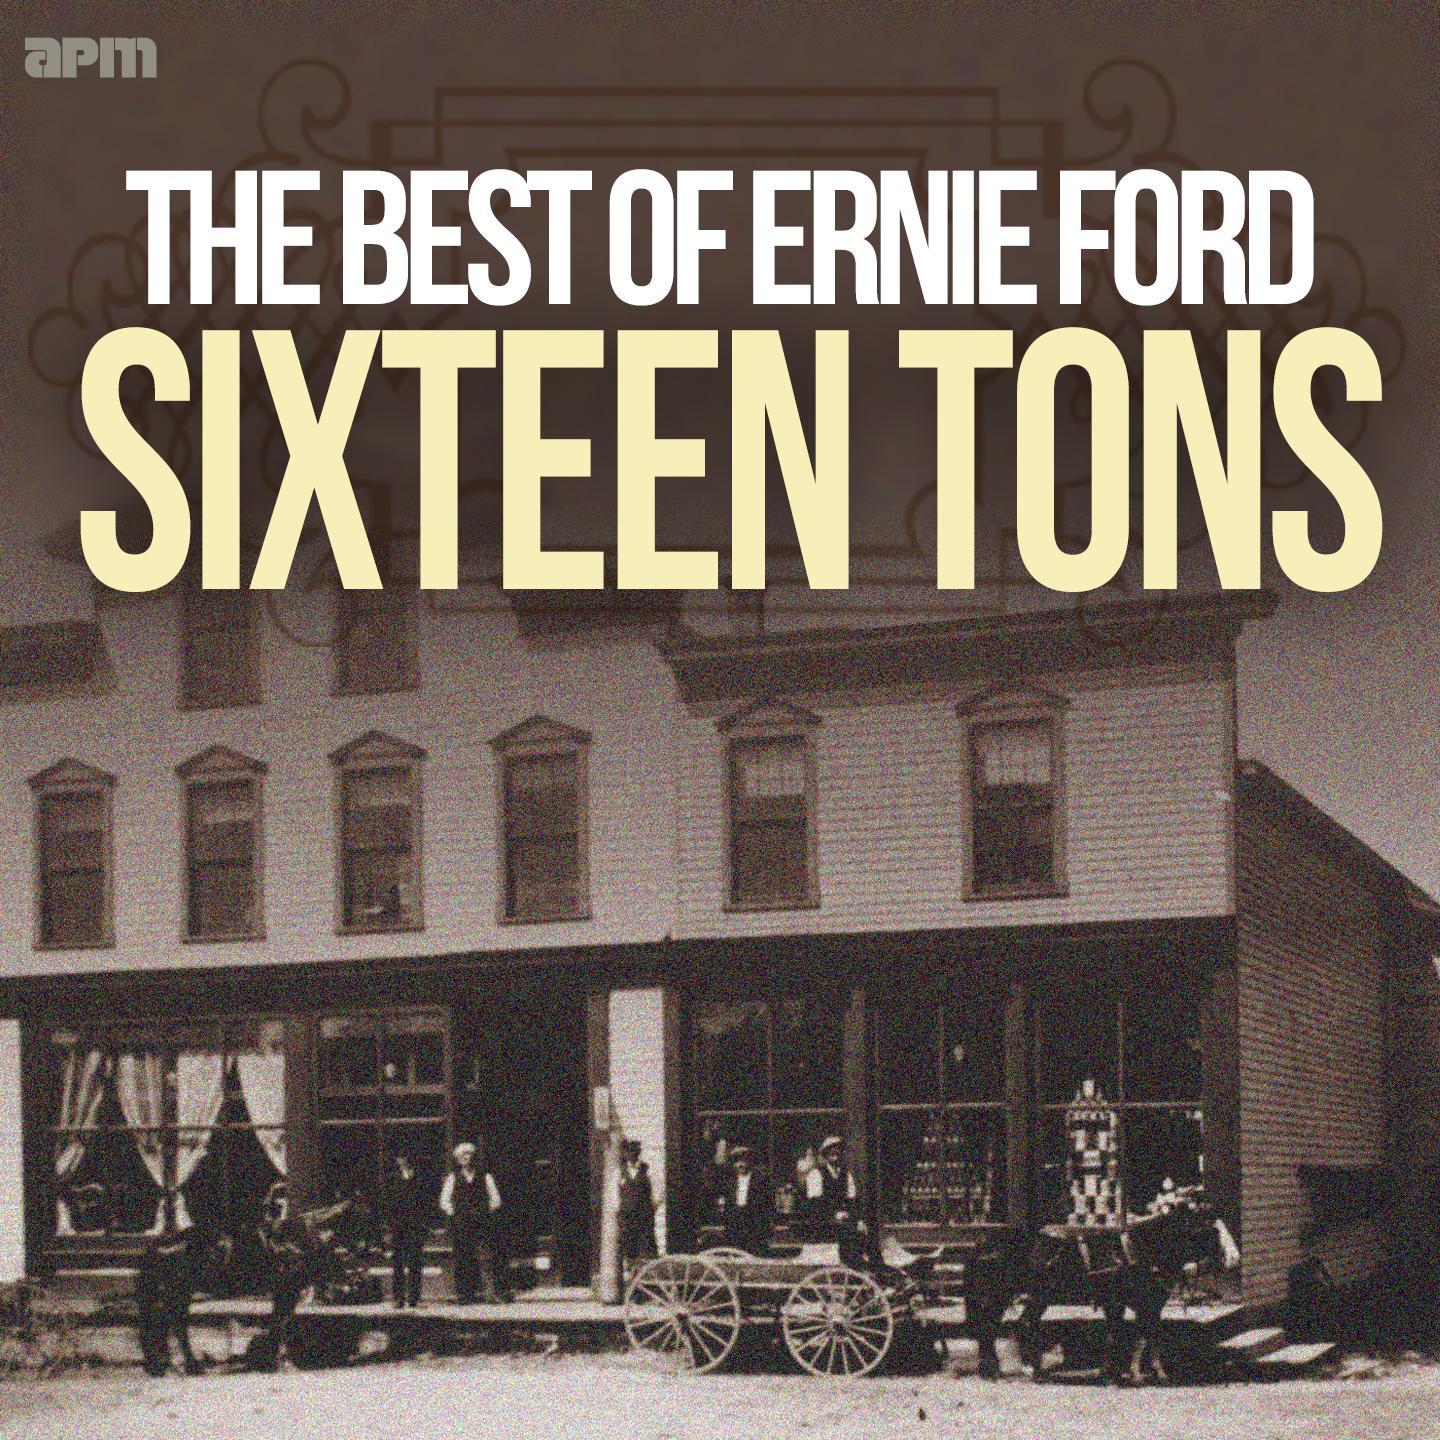 Sixteen Tons - The Best of Ernie Ford